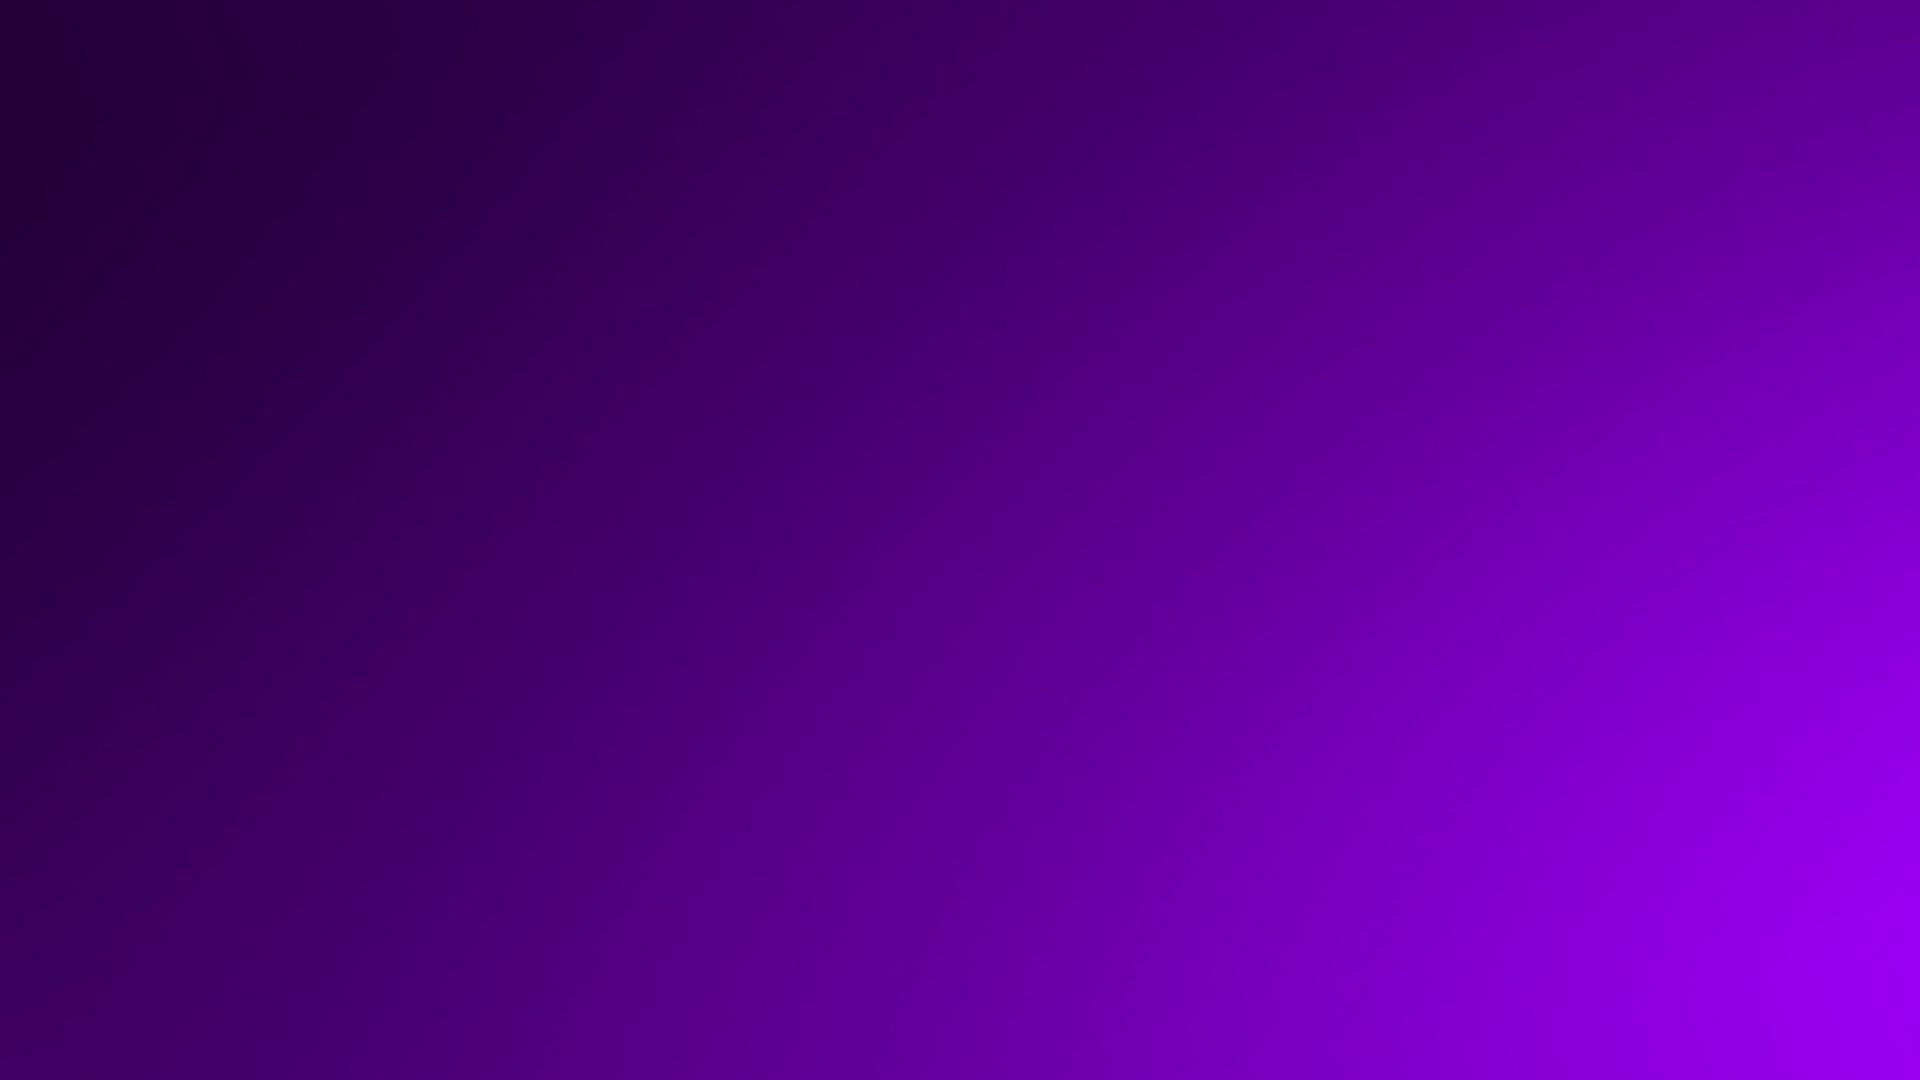 Download wallpaper 1920x1080 background, solid, purple full hd, hdtv, fhd,  1080p hd background